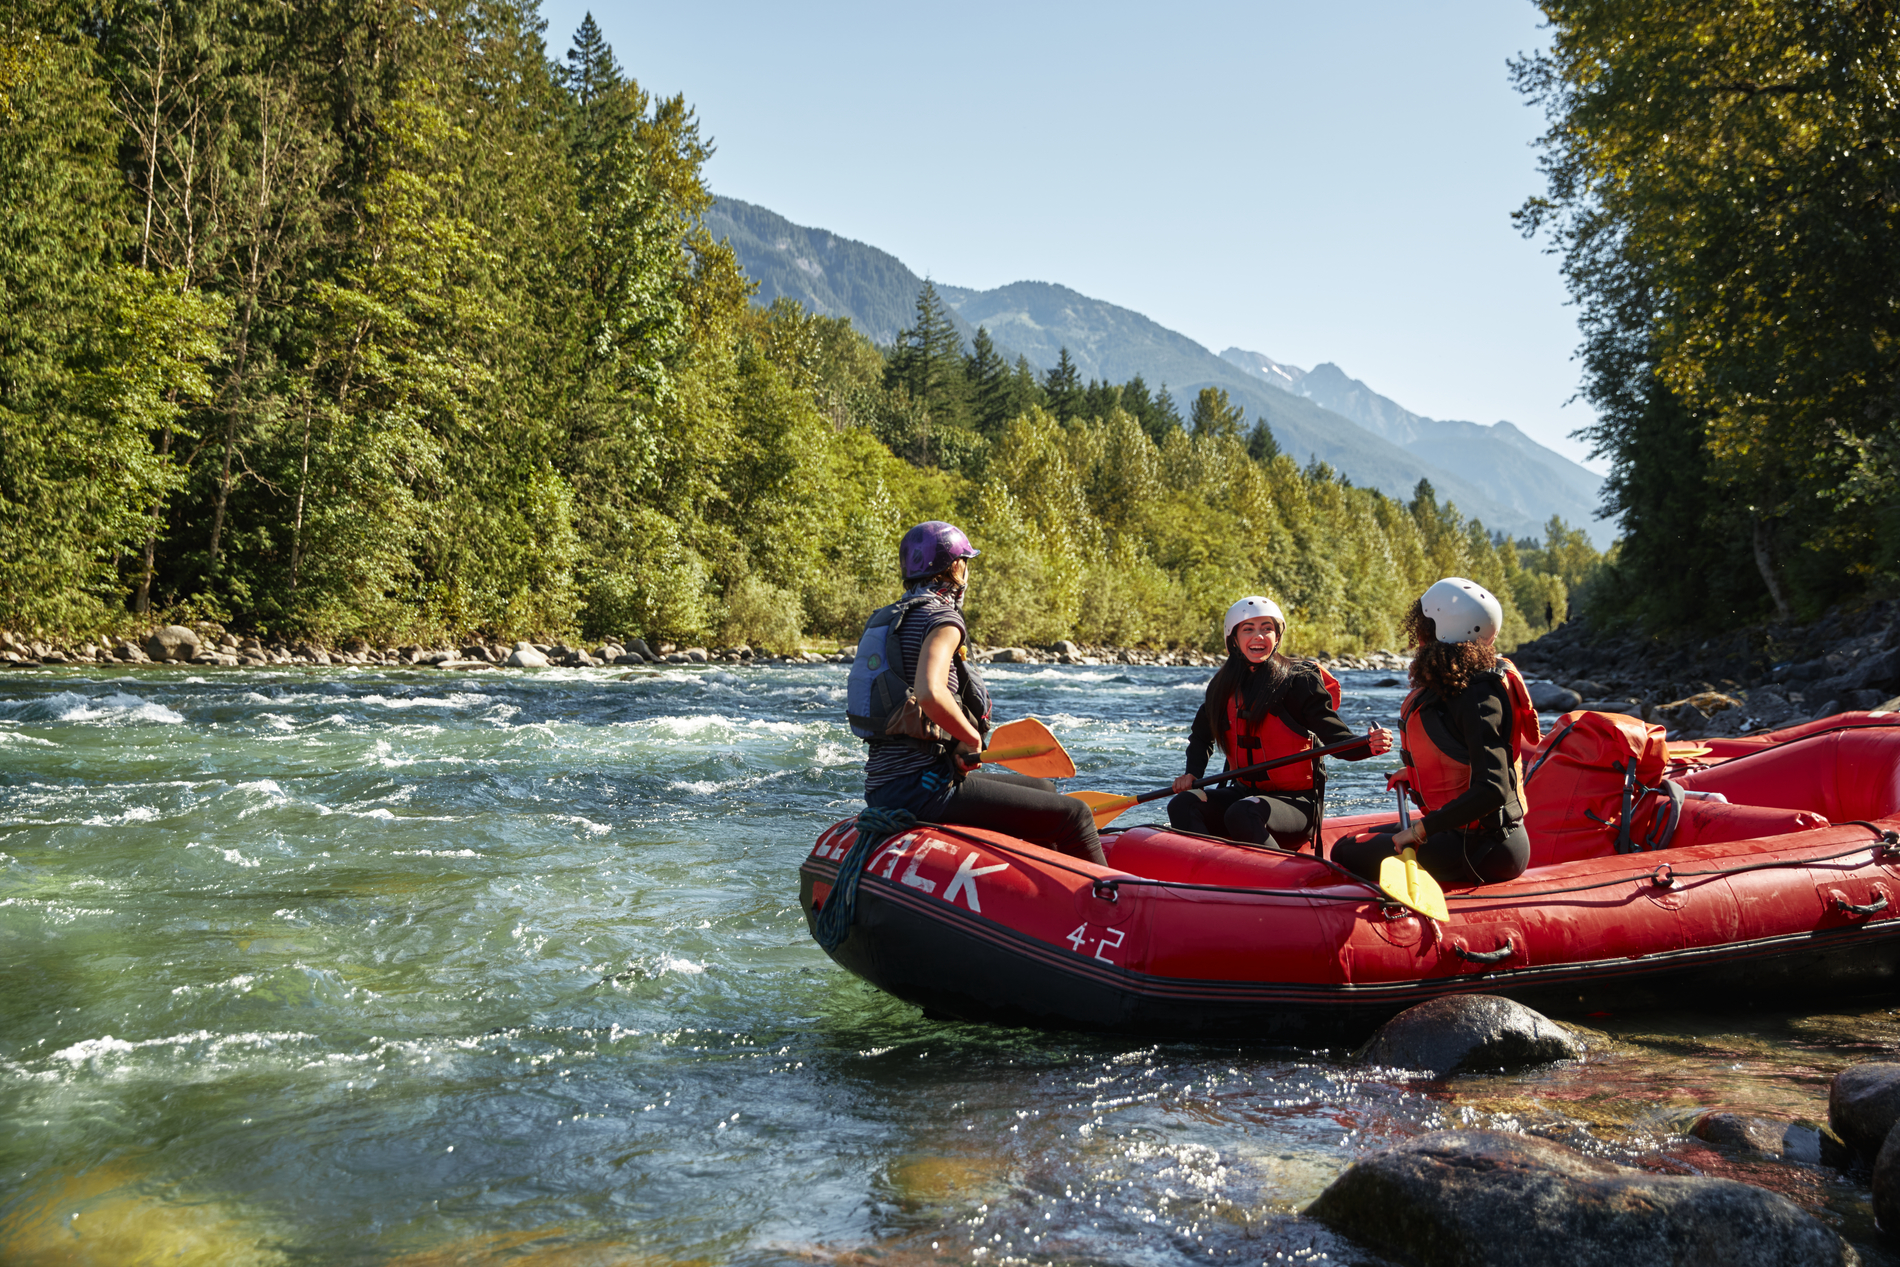 A group of friends river rafting on Vedder River | Hubert Kang